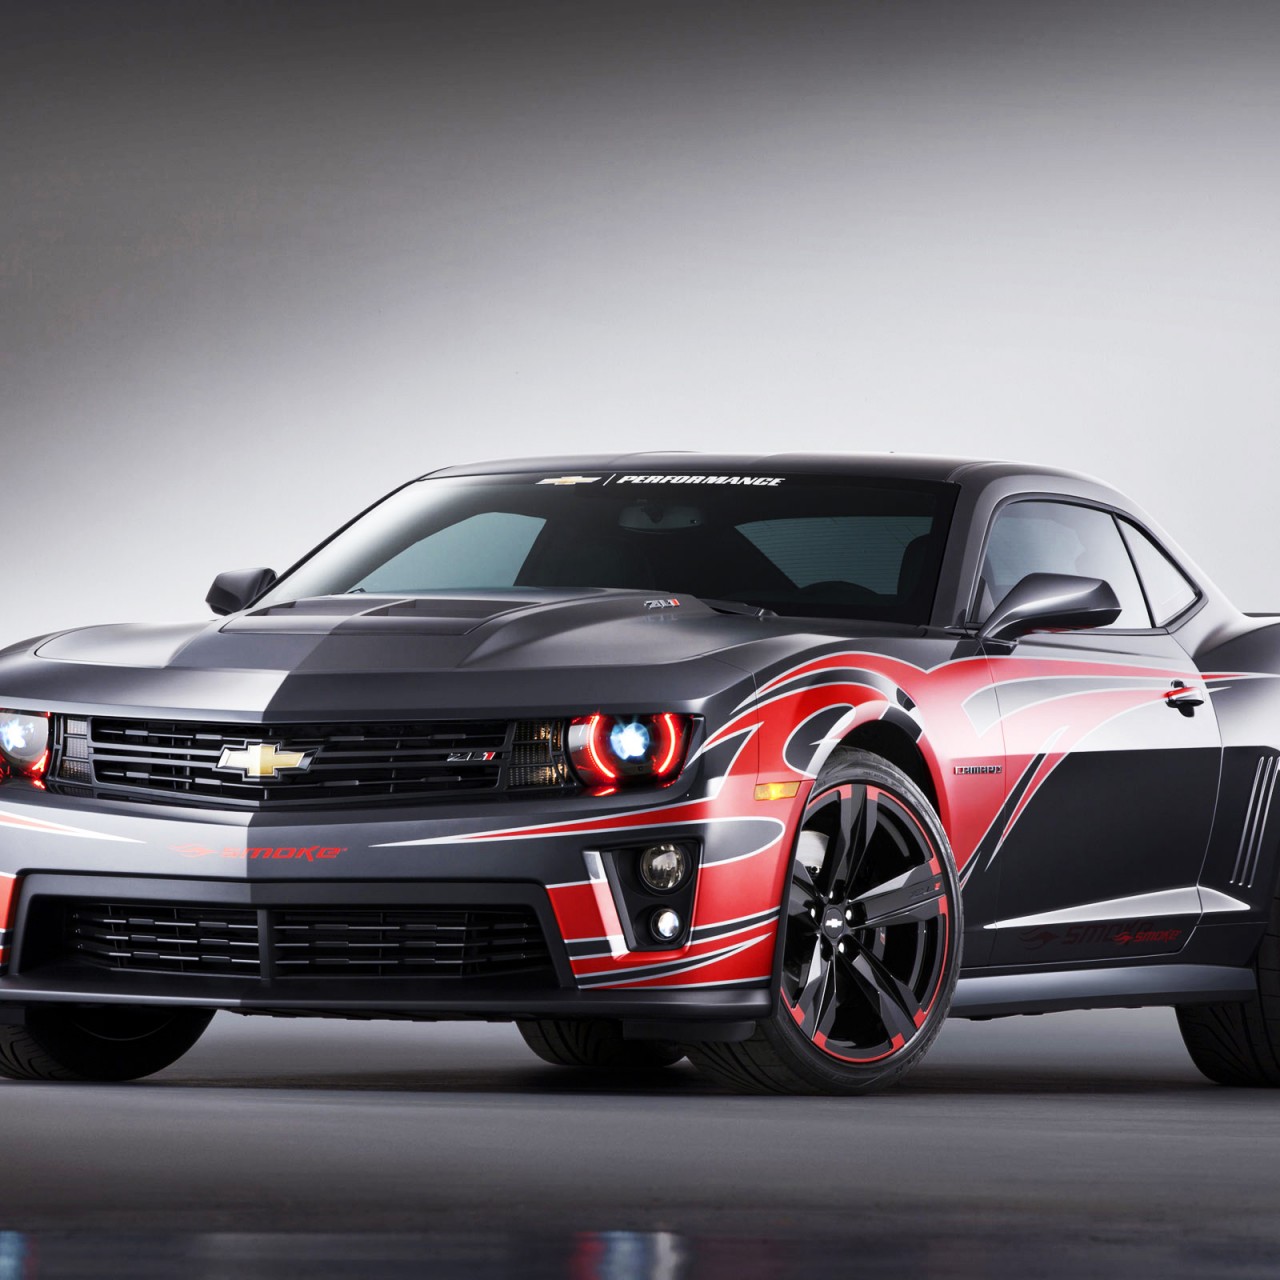 Chevy Muscle Car Wallpaper Hd Wallpapers in Cars Imagescicom